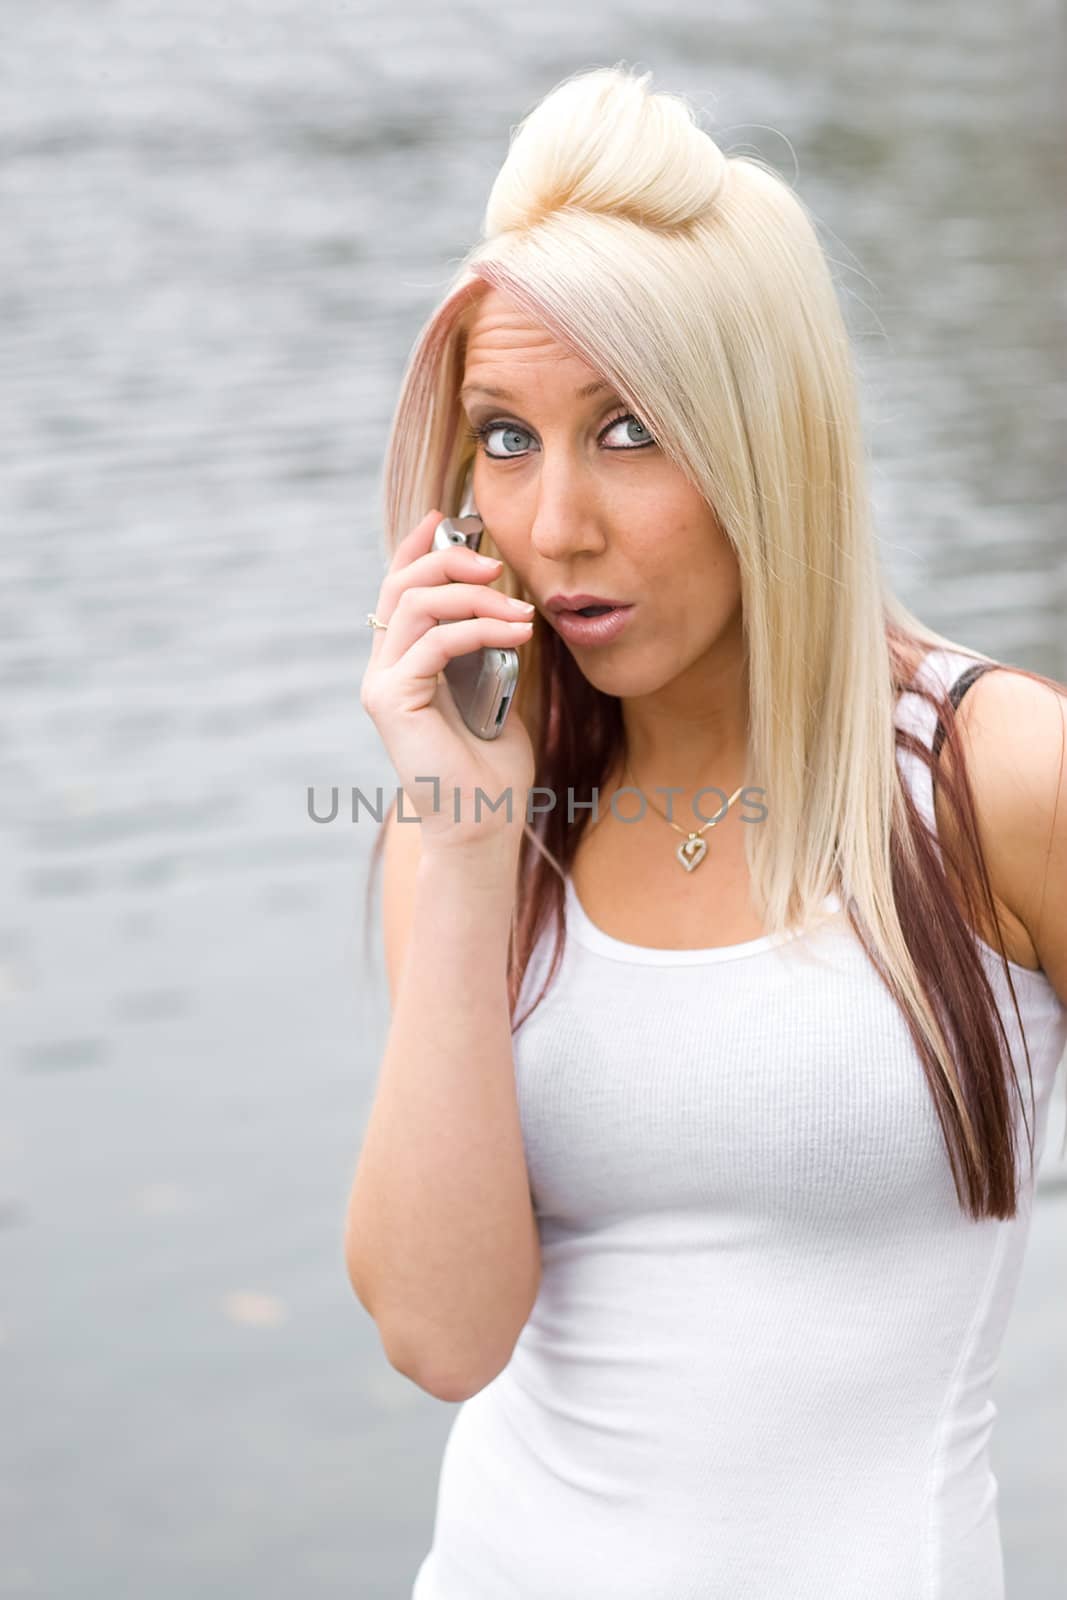 An attractive blonde woman has a surprised look on her face while talking on her cell phone.